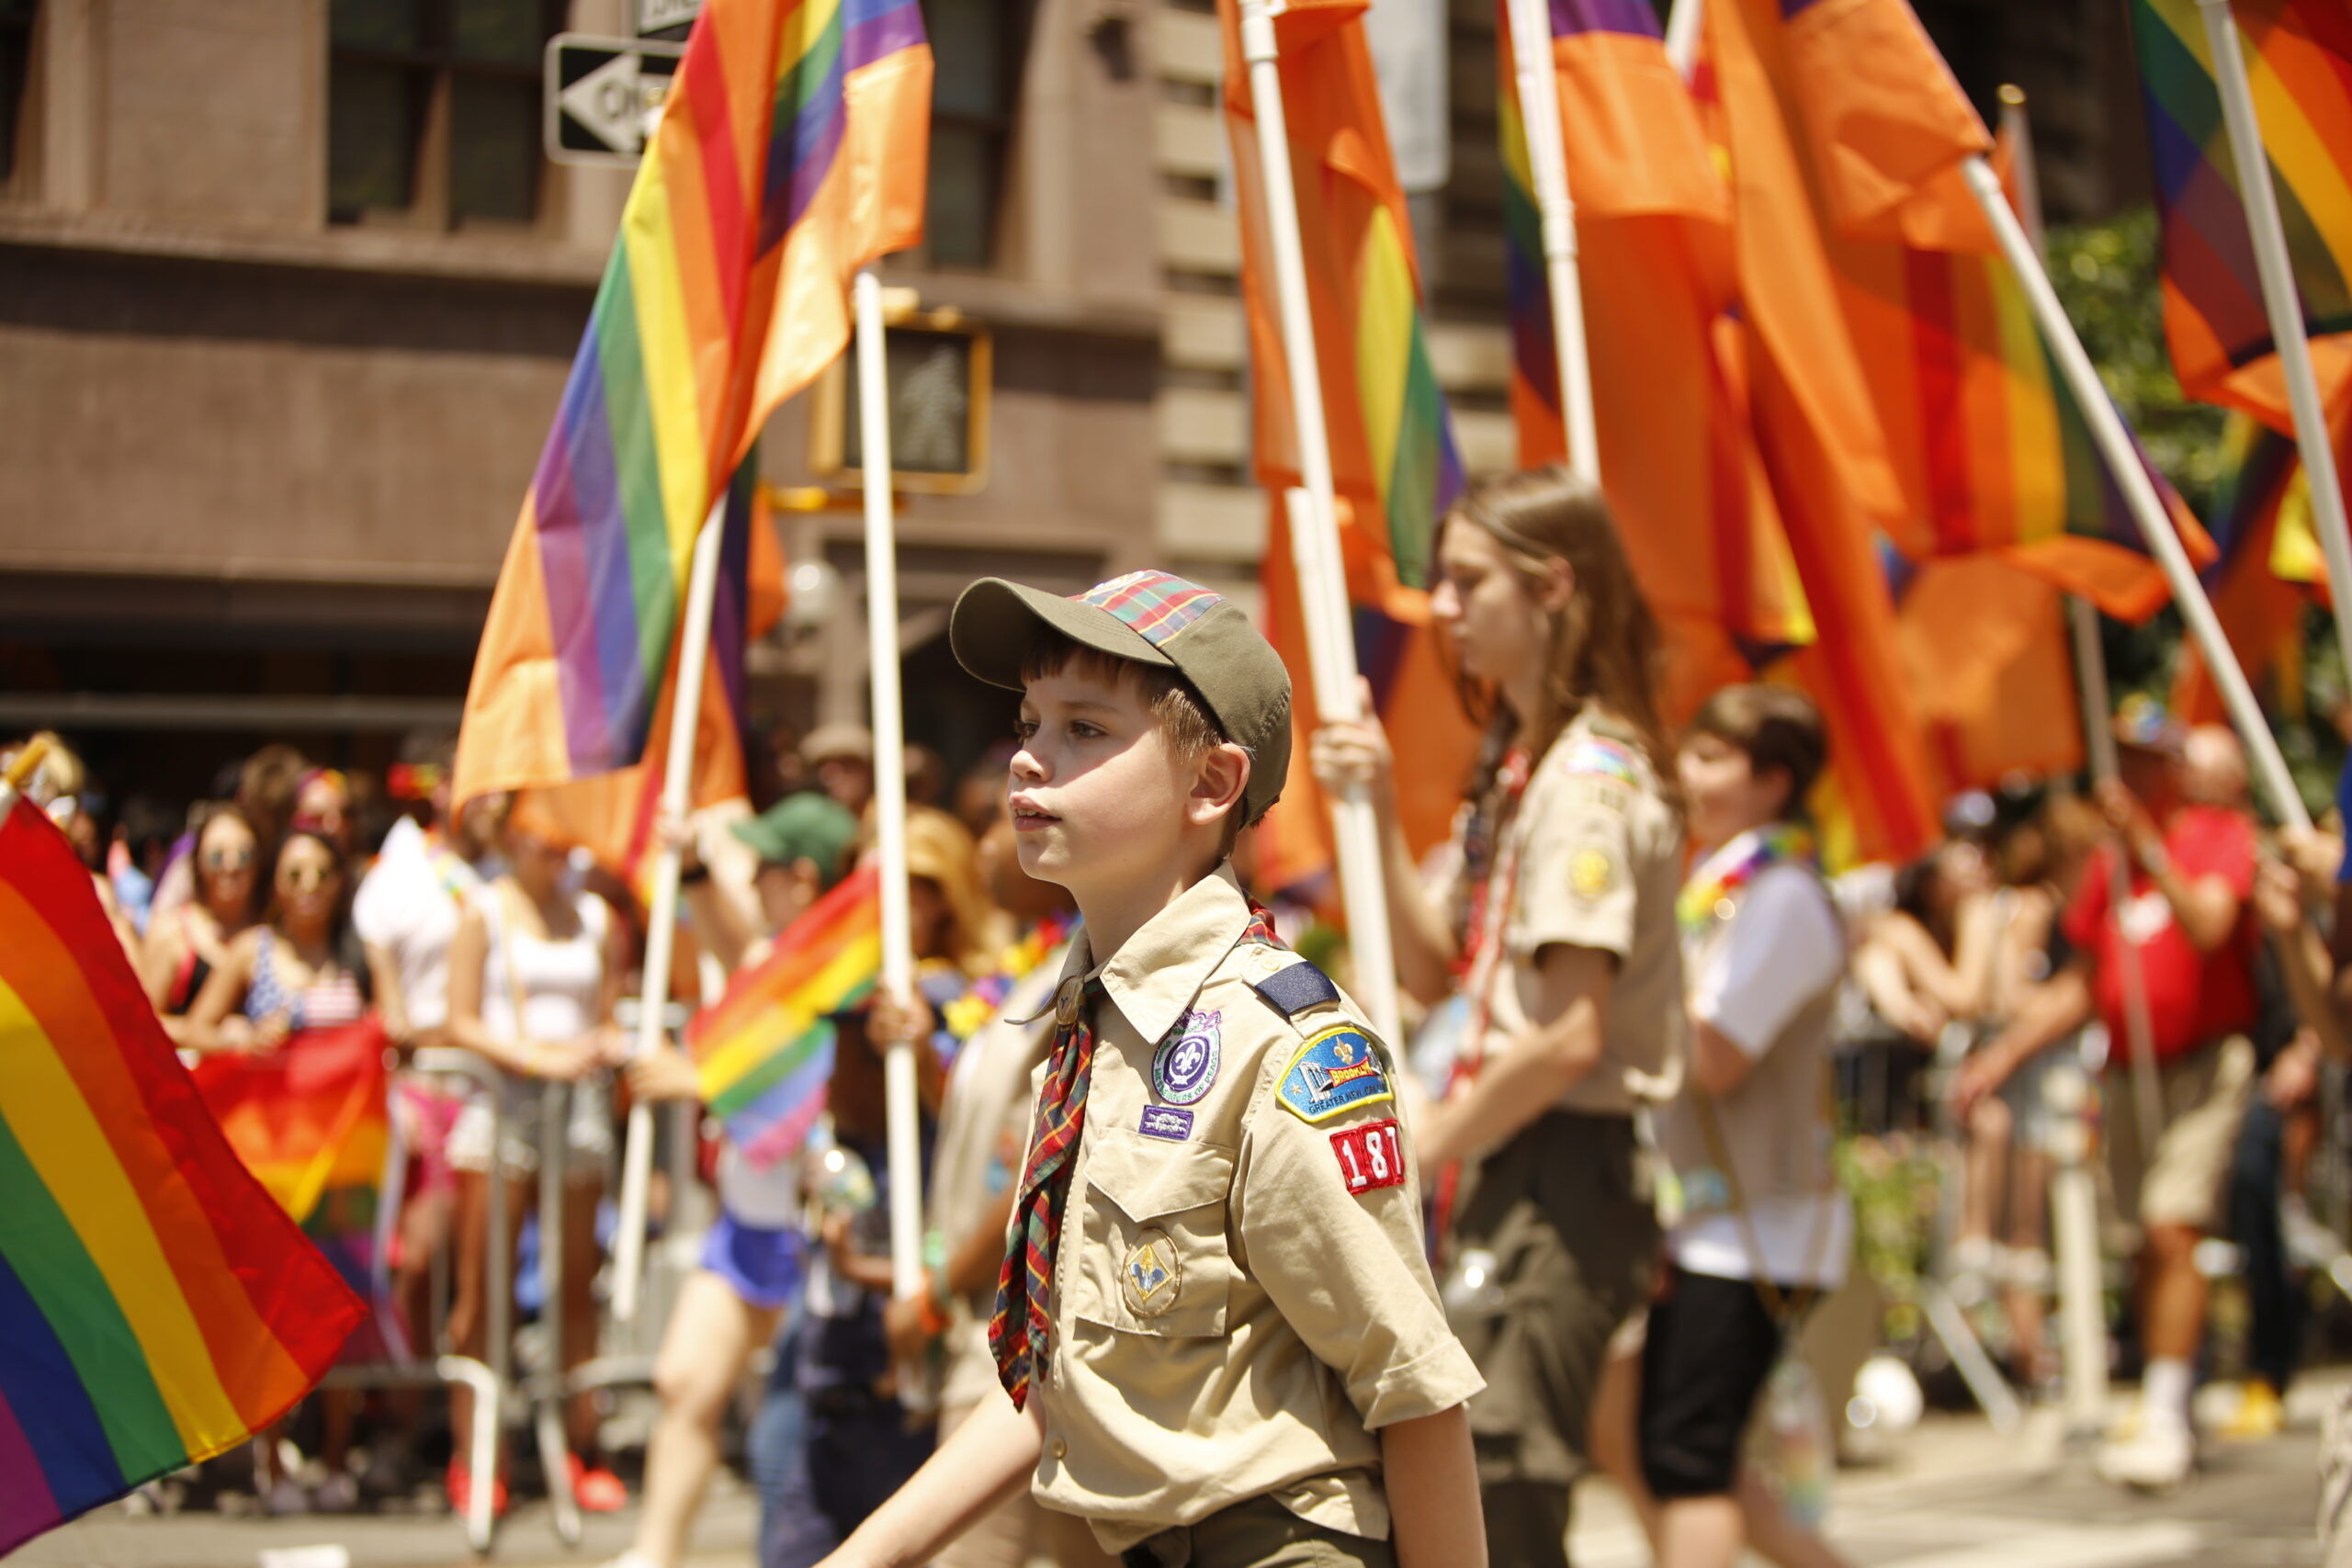 NEW YORK CITY - JUNE 26 2016: The 46th annual NYC Pride March featured over 350 contingents, marching from 36th Street to Christopher & Greenwich Sts. Scouts for equality